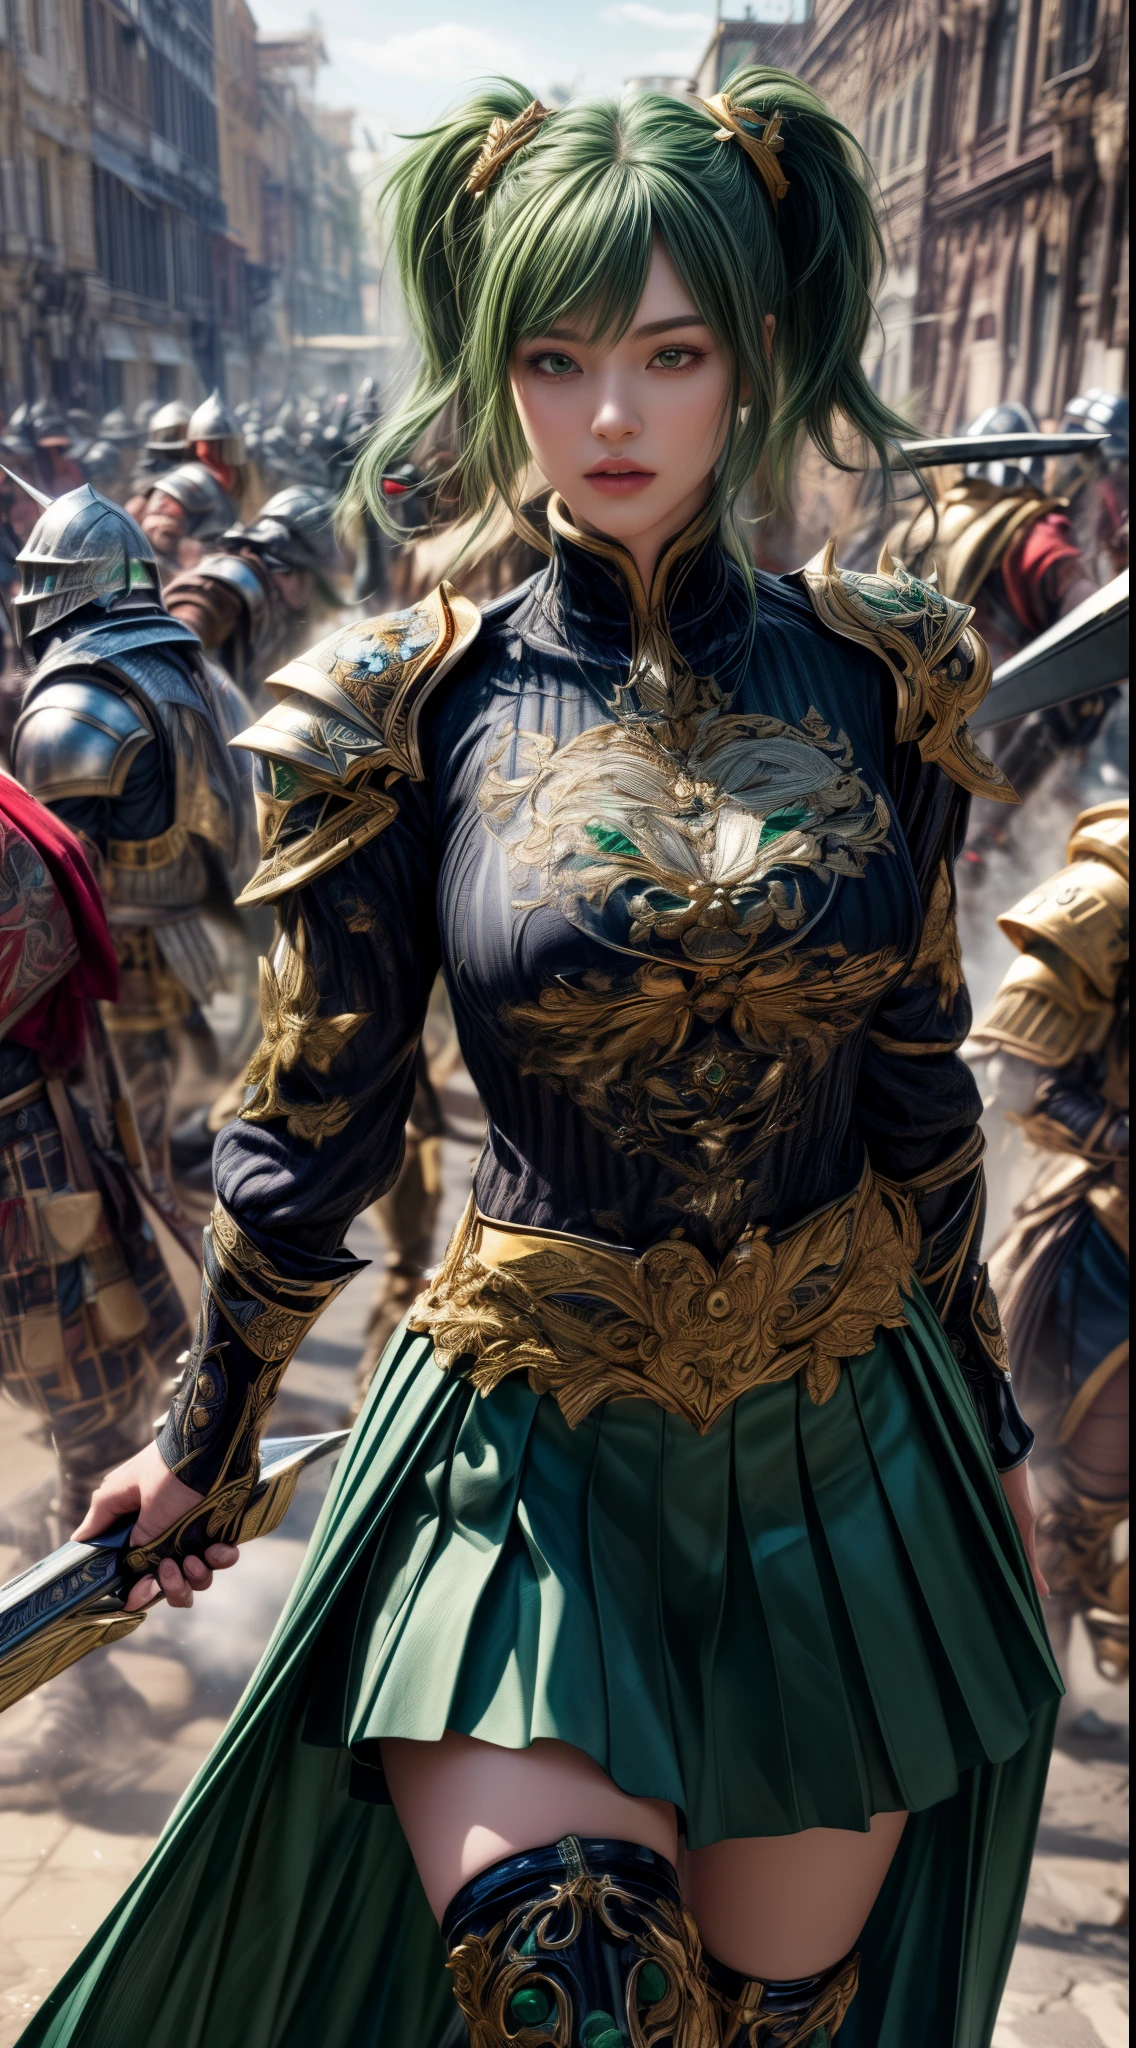 Very beautiful girl、、Slender、(((low length)))、(Detailed face)、Realistic Skin、((holy knight)), ((Dark Green Armor))、((((Black armor with very fine and intricate decoration:1.1))))、((Delicate photo))，(Girl Astepeace RAW Photo Details:1.25), (highest quality:1.6), (超A high resolution:1.5), (Realistic:1.75), 8K resolution, Canon EOS R5, 50mm, Absurd, Ultra-detailed,Cinema Lighting,((battlefield))、((battle))、(((Decorative green skirt)))、Thigh-high socks、Shin Guards、((Dark green hair))、((Low Twintails))、((Hairstyle with bangulticolored Hair))、Get six-pack、Cape、Beautiful Armor、(((Has a huge weapon)))、(In combat)、The wind is blowing、((Symmetrical Armor))、((((tornado))))、(((Leading a large group of knights:1.2)))、Banner、Lion-themed armor、(((Intense battle scenes)))